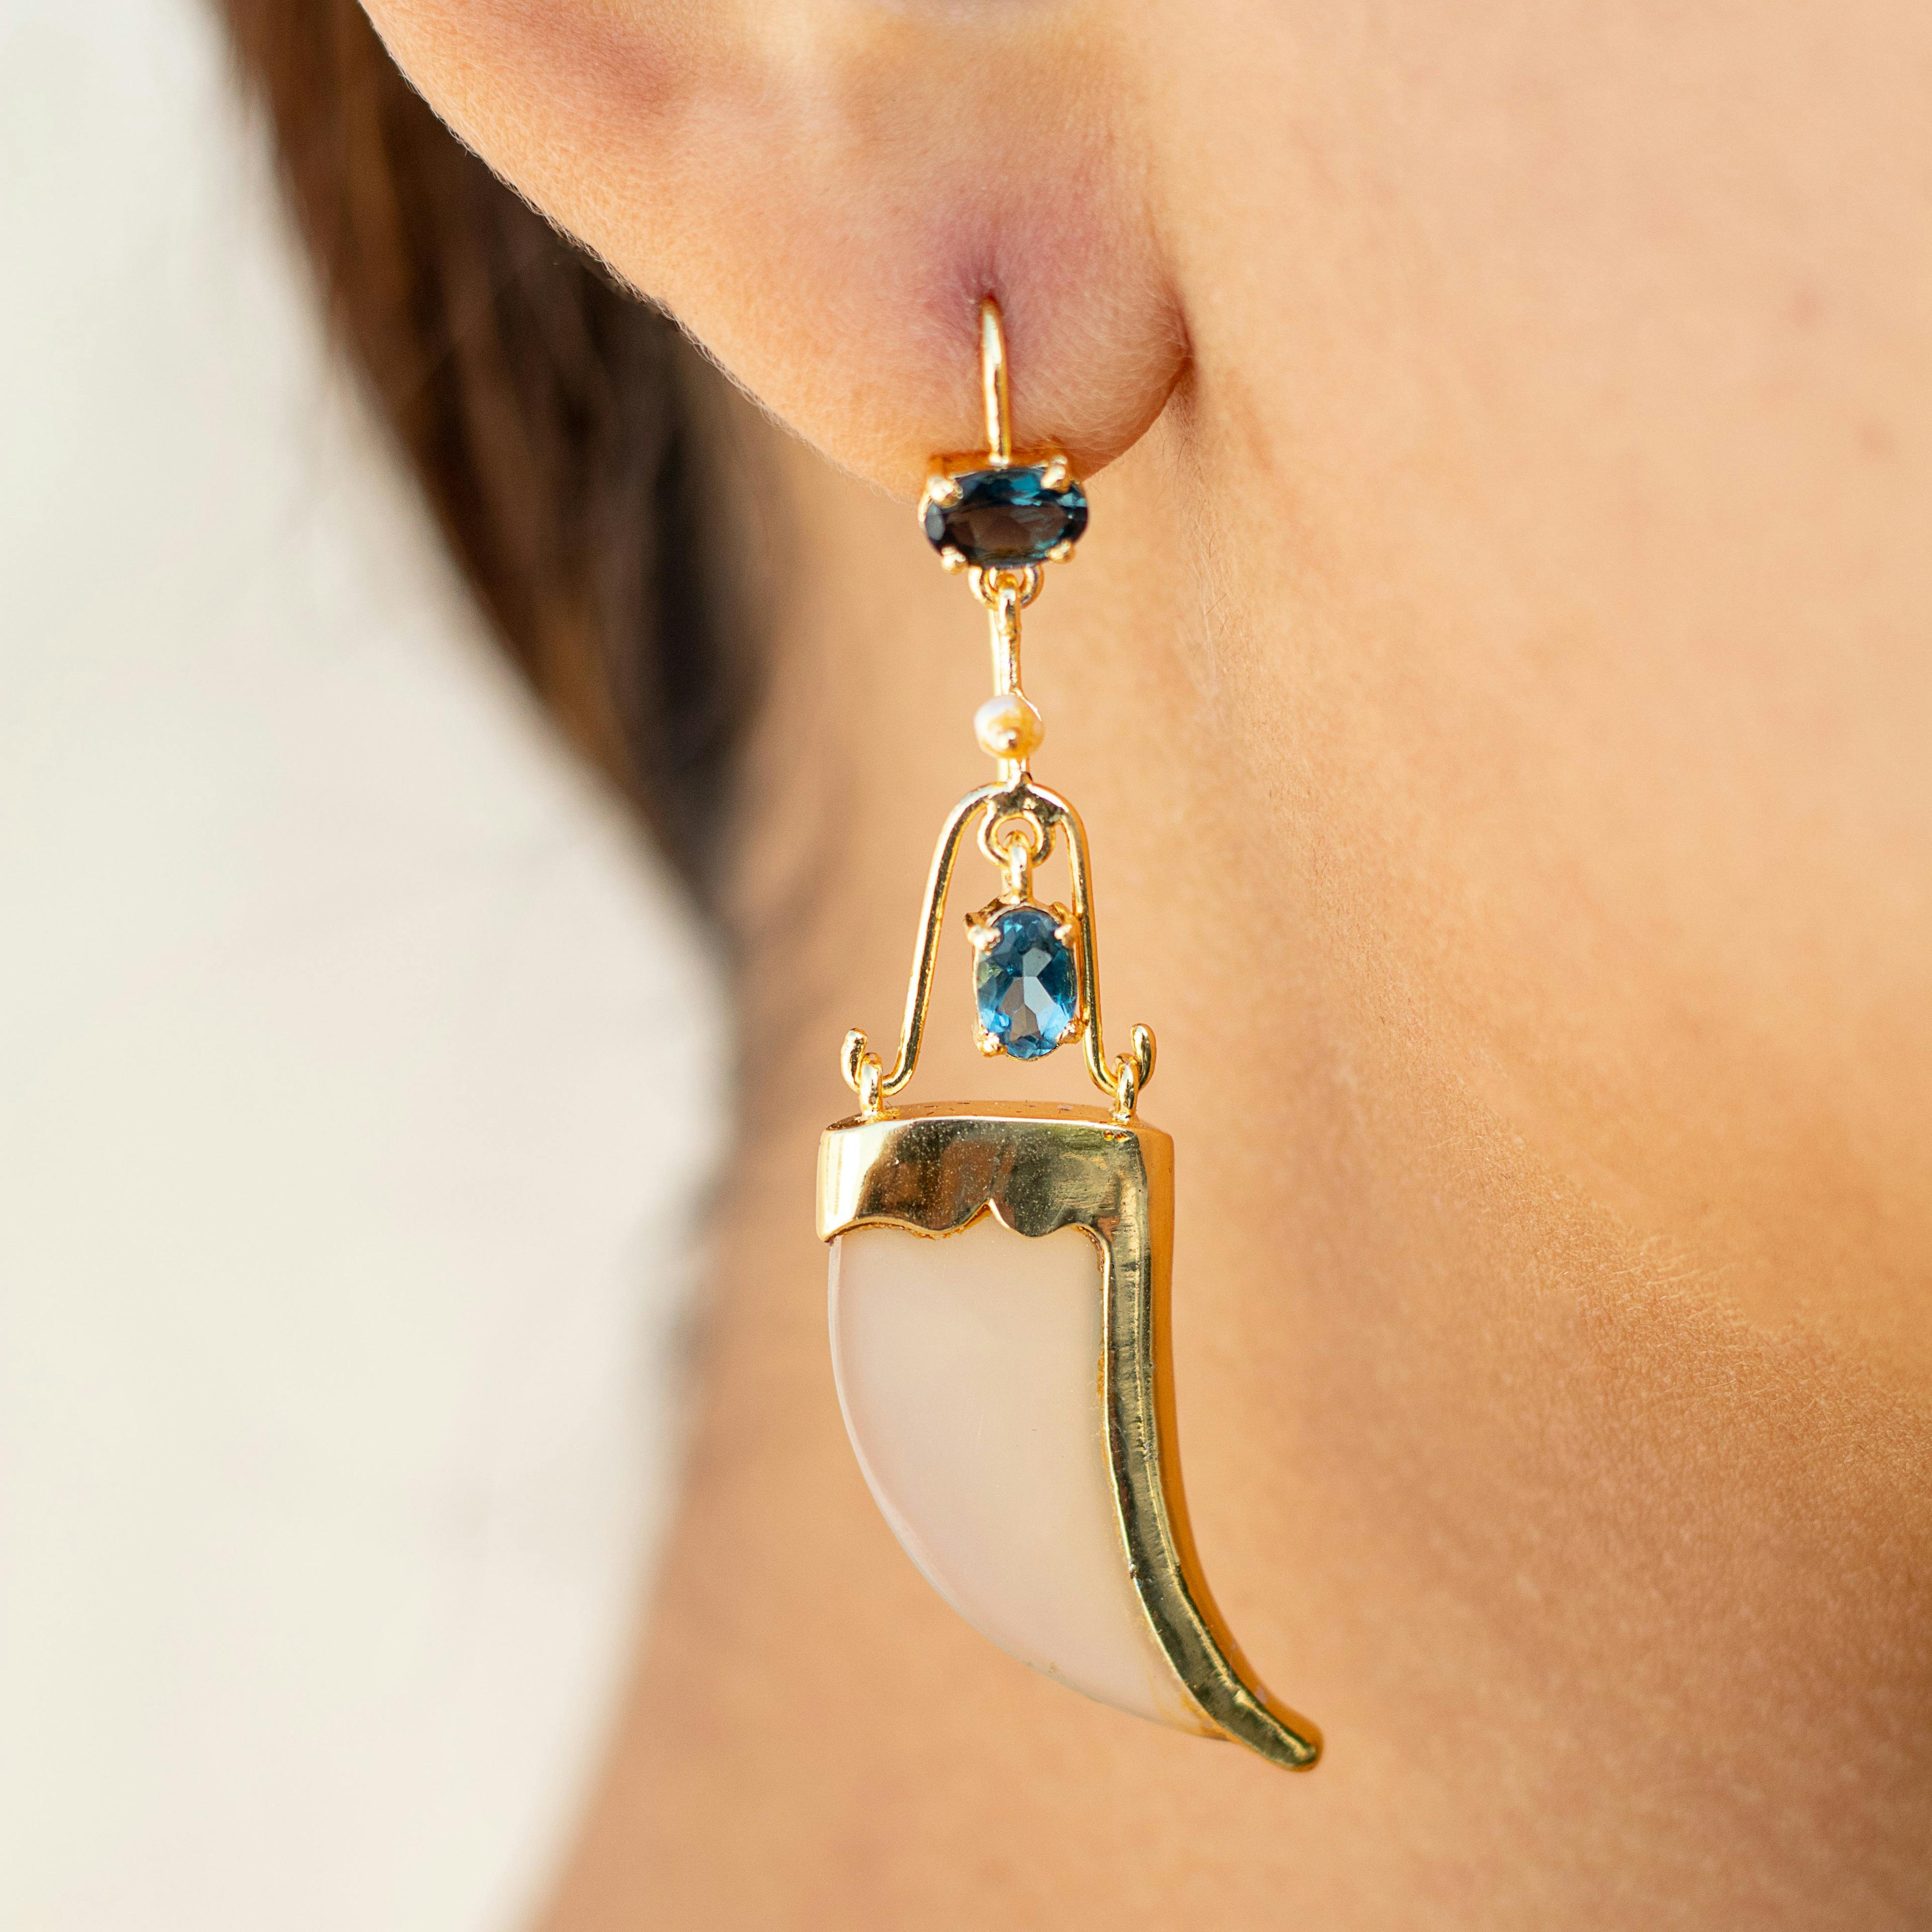 AVANI Faux Tiger Claw Blue Imperial Earrings, a product by Baka